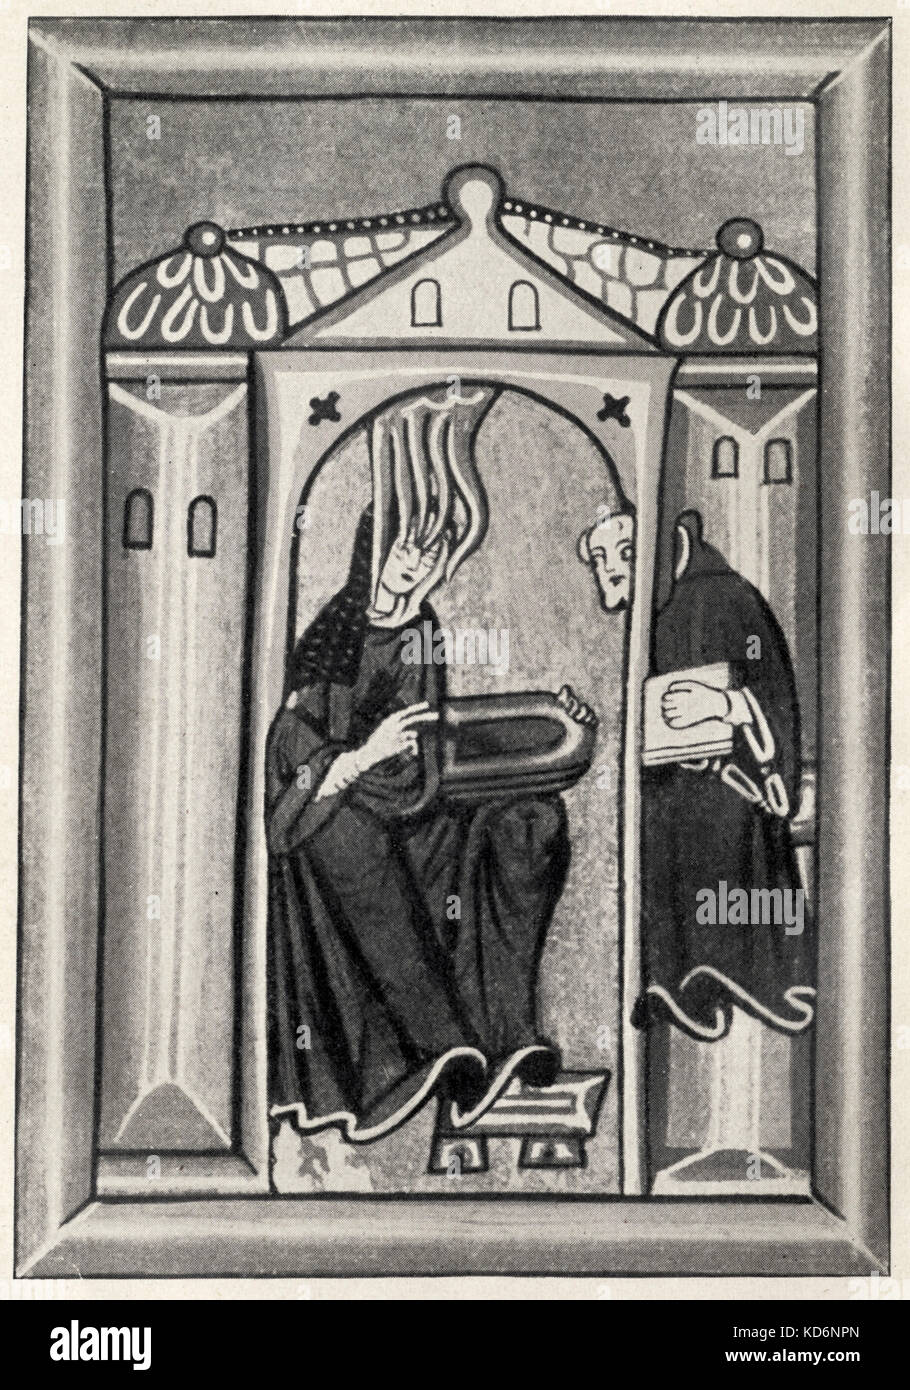 HILDEGARD von Bingen, Saint. Her composing is inspired by the Holy Spirit around her head.  Illustration from Codex at Wiesbaden German abbess and musician (1098-1179)   She wrote monophonic music for the church which shows some departures from traditional plainsong style. Stock Photo